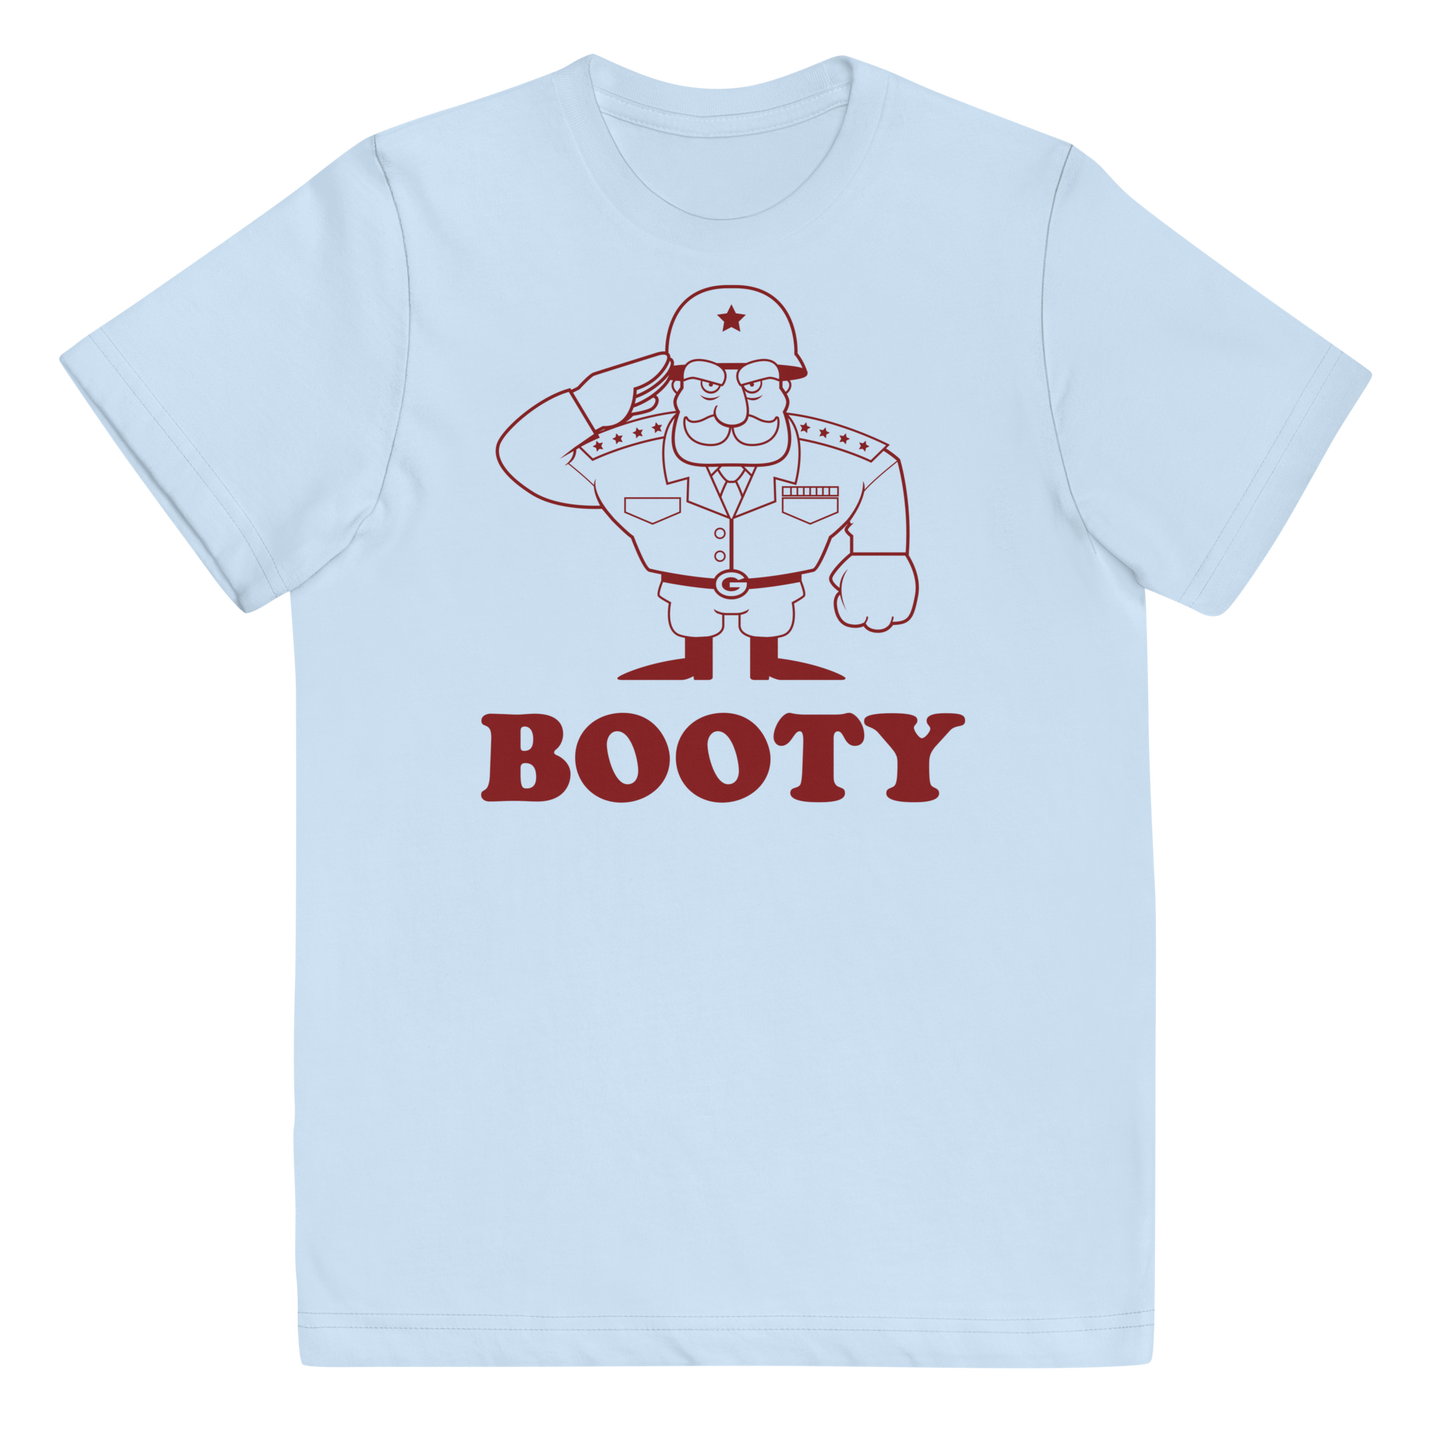 BOOTY CARTOON YOUTH - The General Booty Official Shop by More Than Just A Name | MTJN